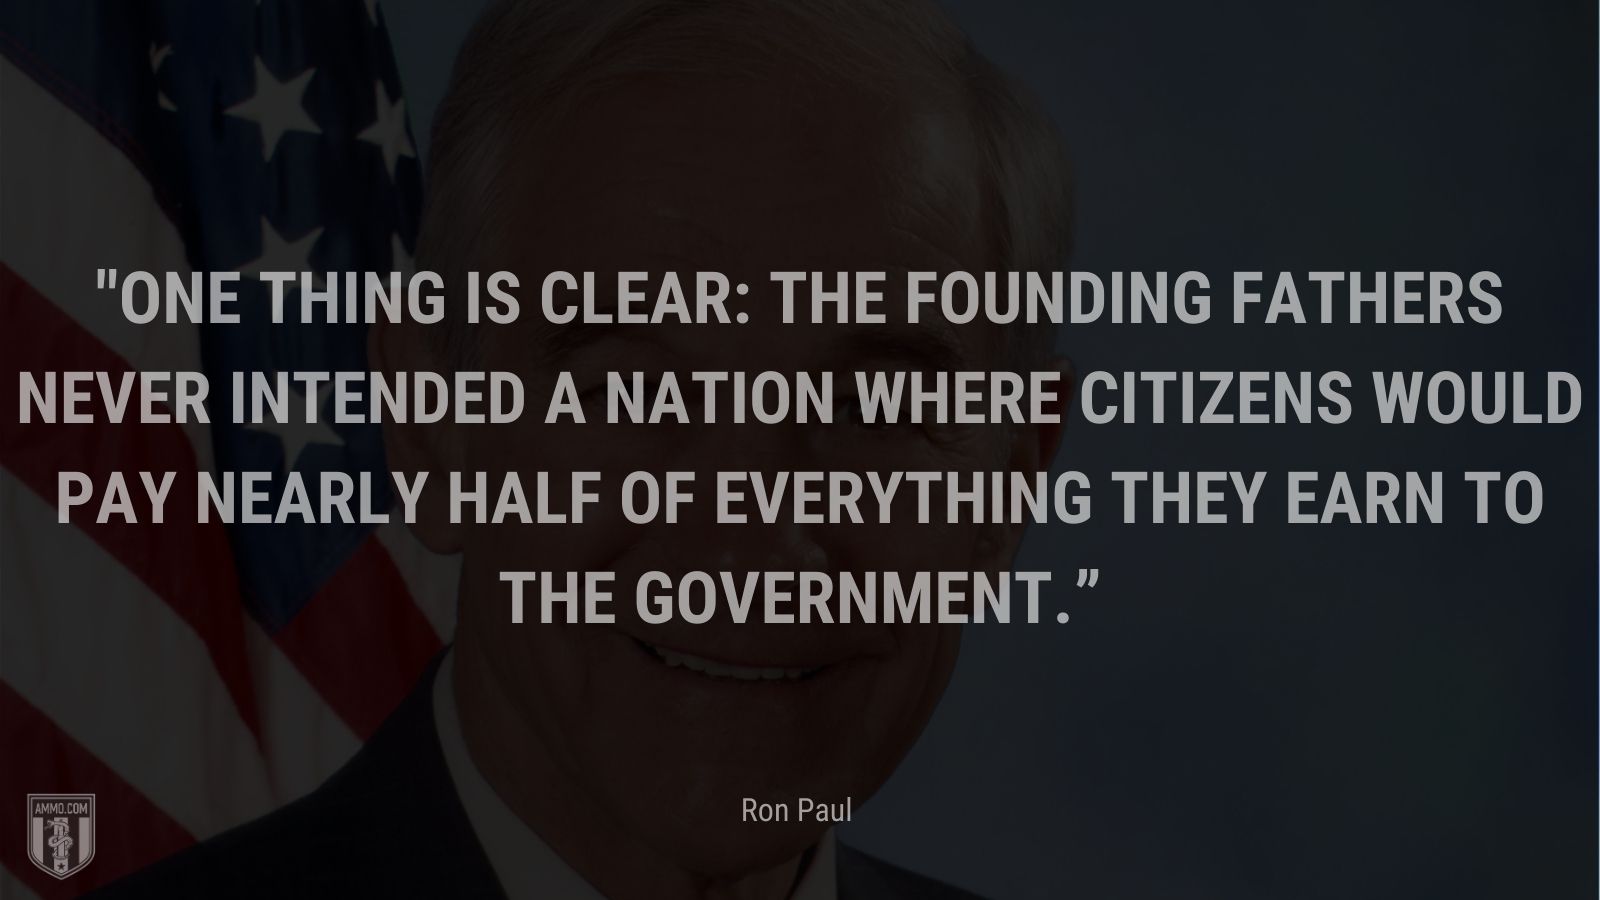 “One thing is clear: The Founding Fathers never intended a nation where citizens would pay nearly half of everything they earn to the government.” - Ron Paul